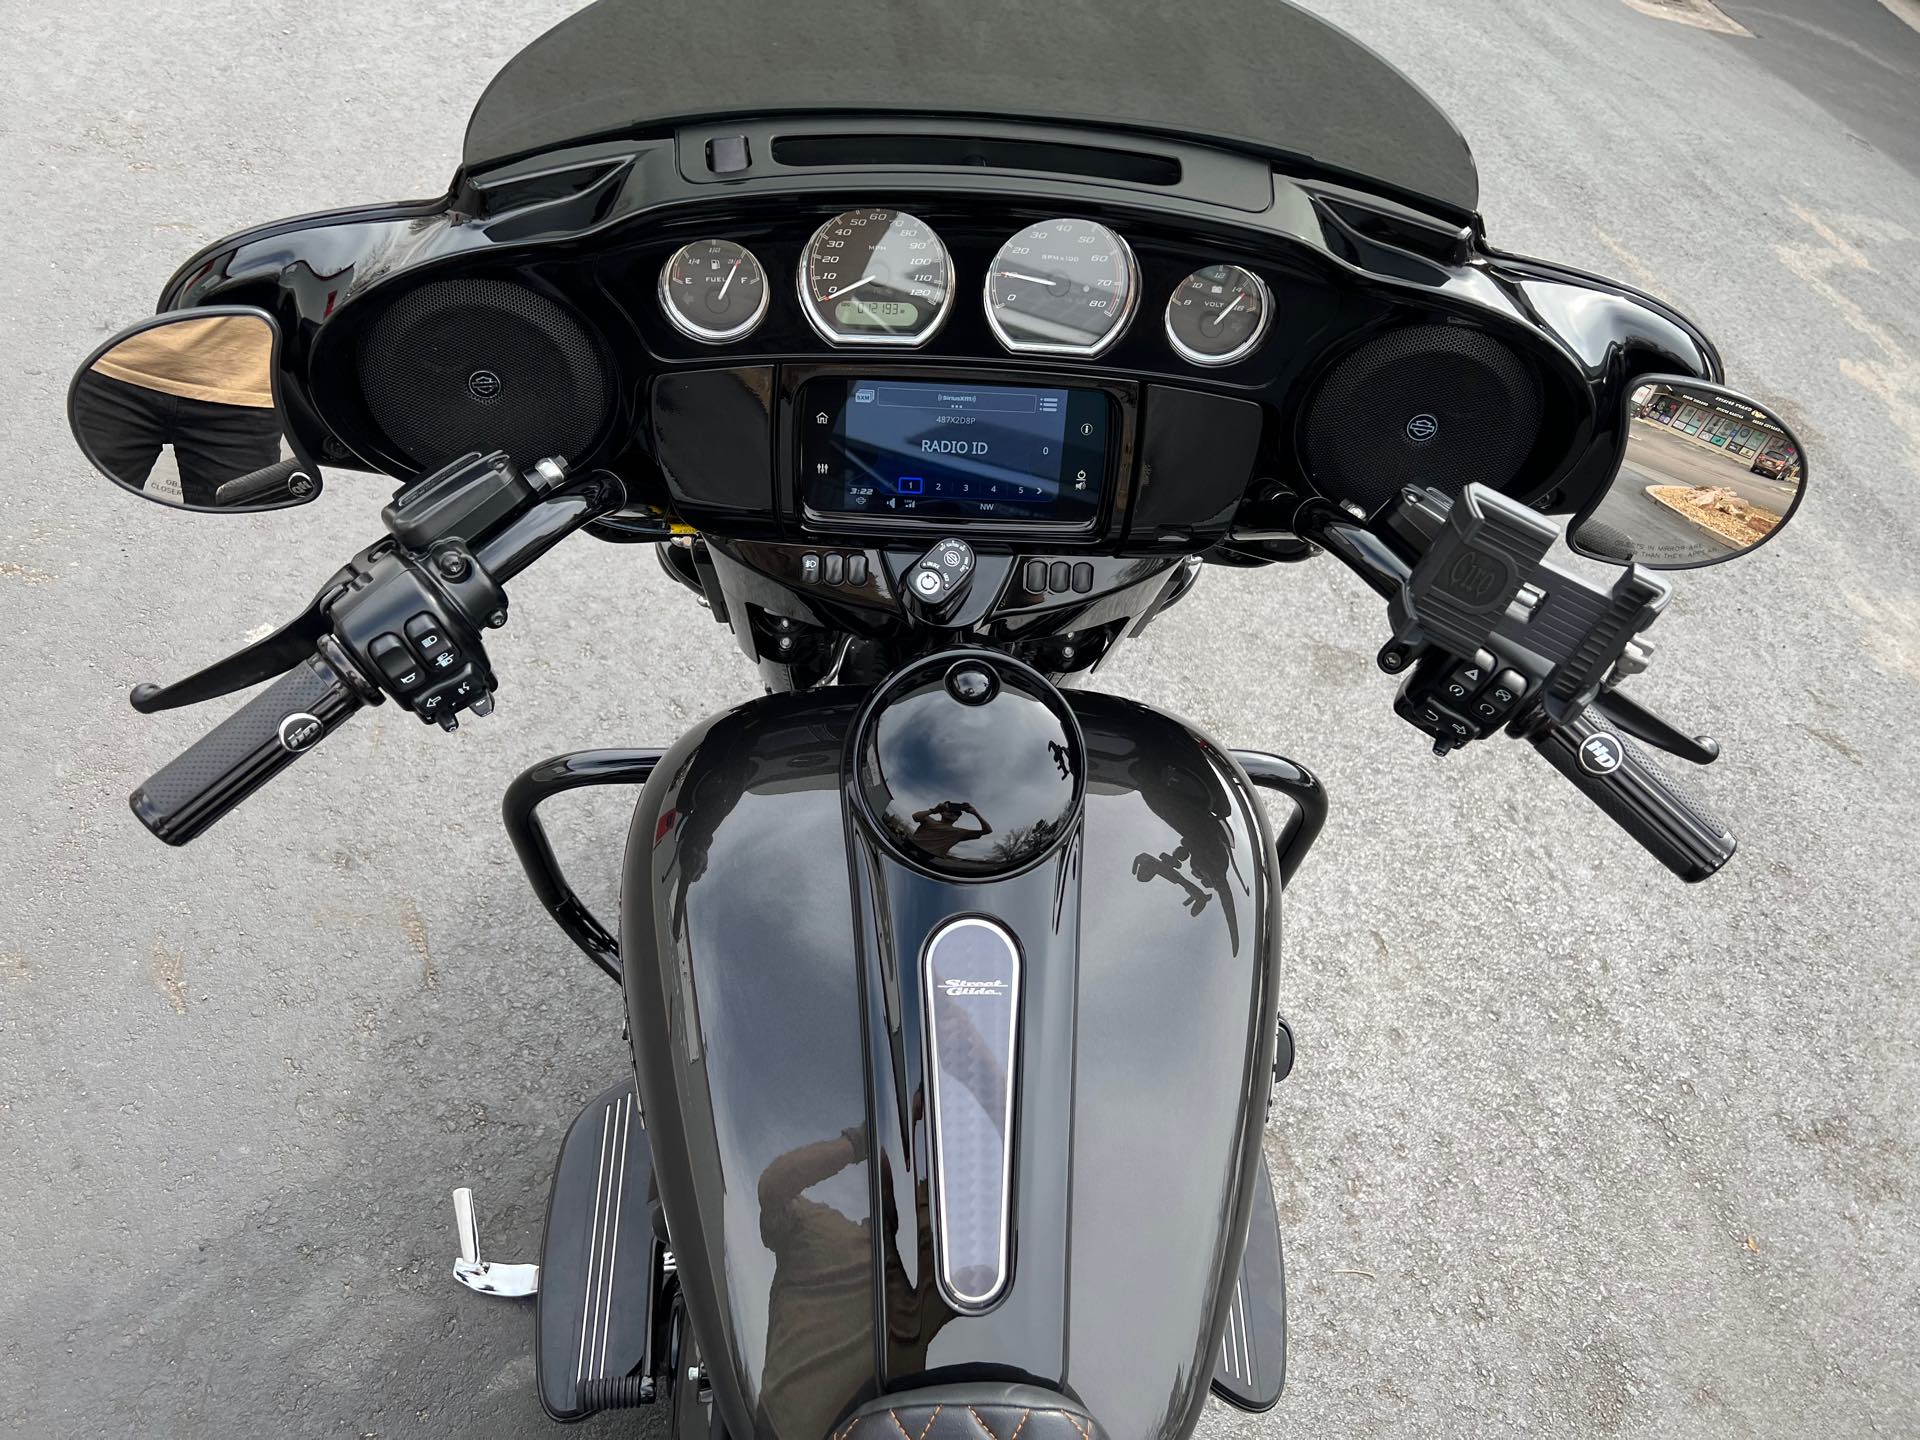 2019 Harley-Davidson Street Glide Special at Aces Motorcycles - Fort Collins